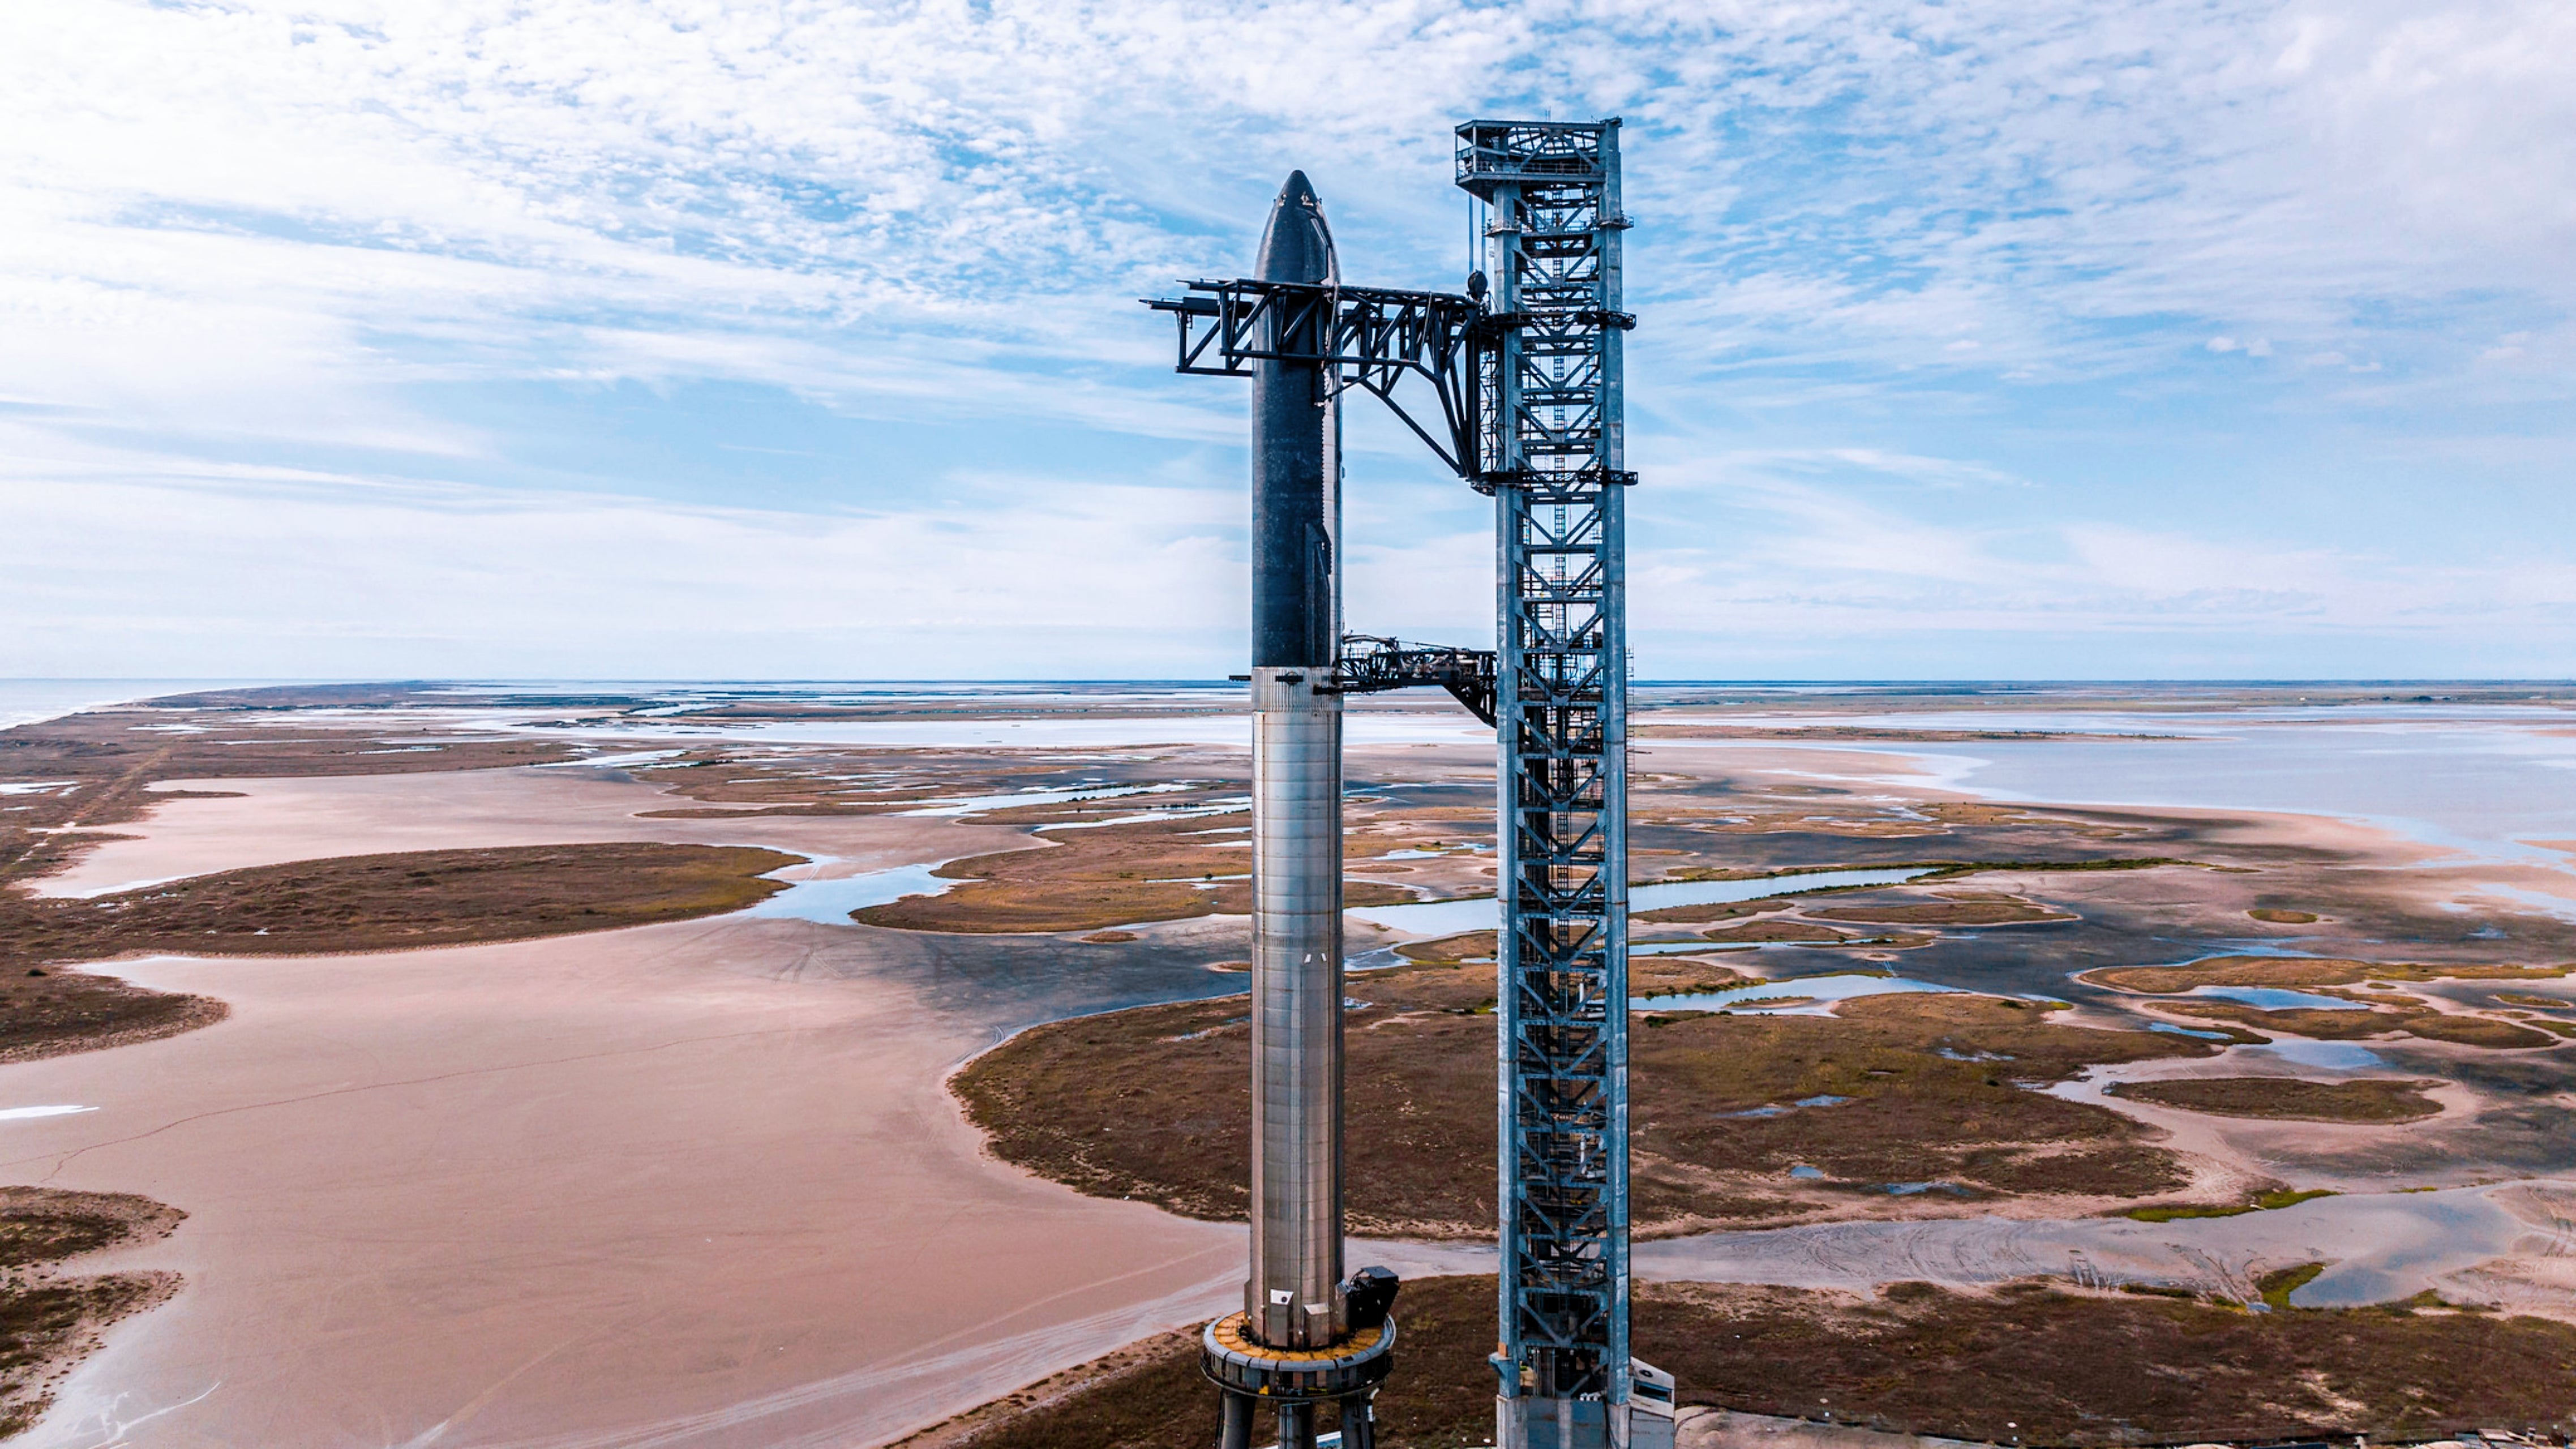 SpaceX shares an amazing video of 'Mechazilla' stacking Starship atop Super Heavy rocket